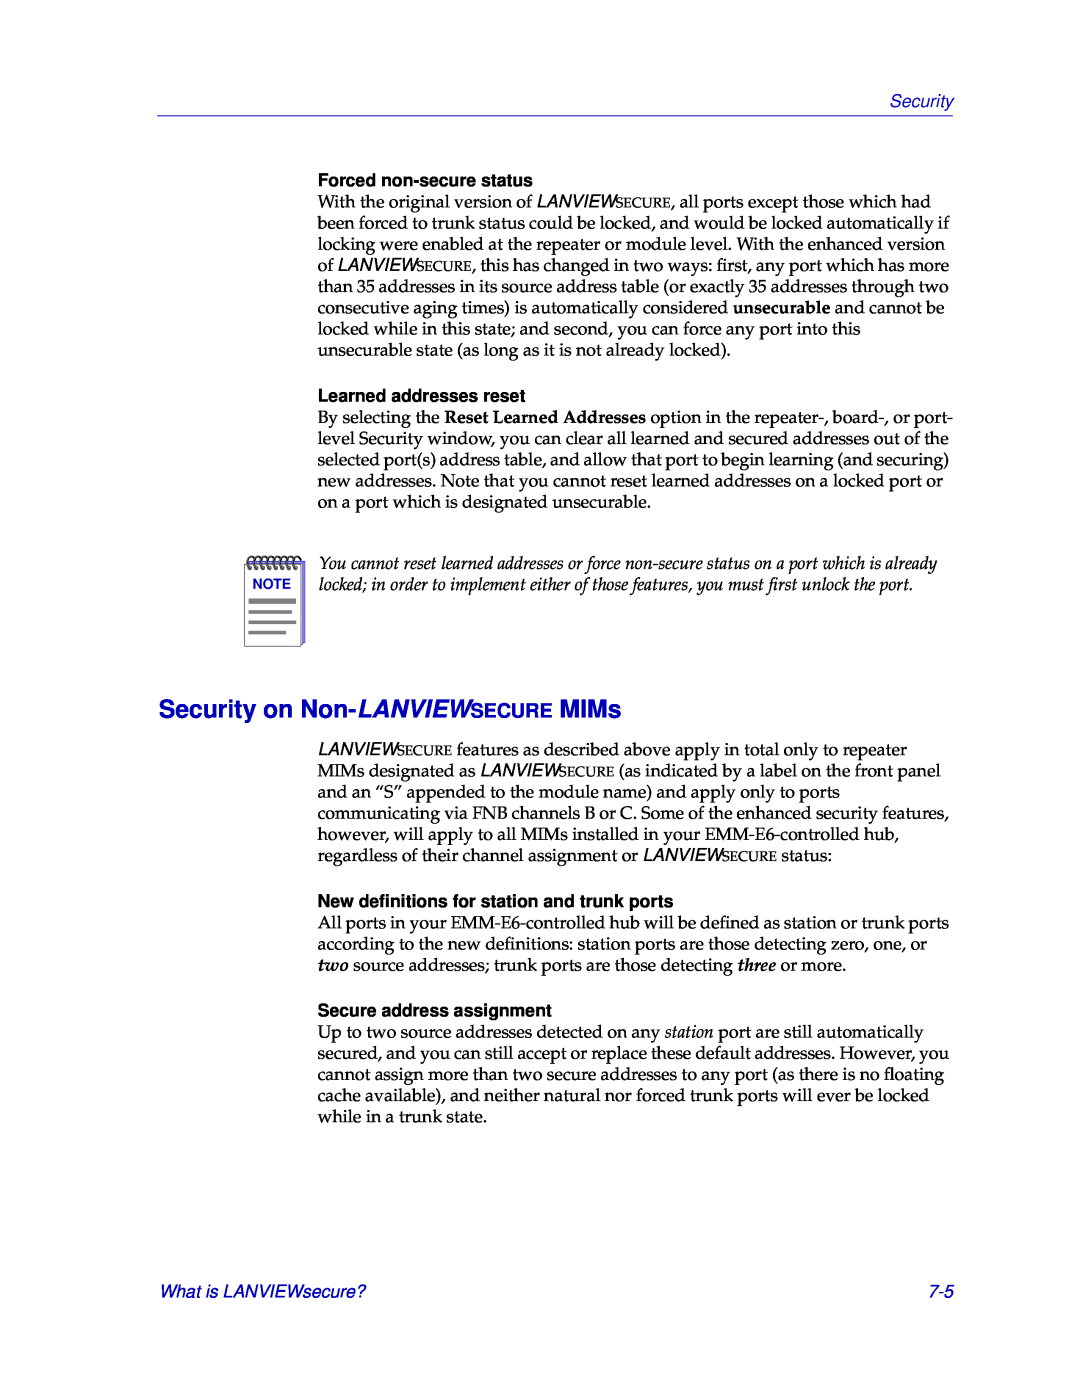 Cabletron Systems EMM-E6 manual Security on Non-LANVIEWSECURE MIMs, Forced non-secure status, Learned addresses reset 